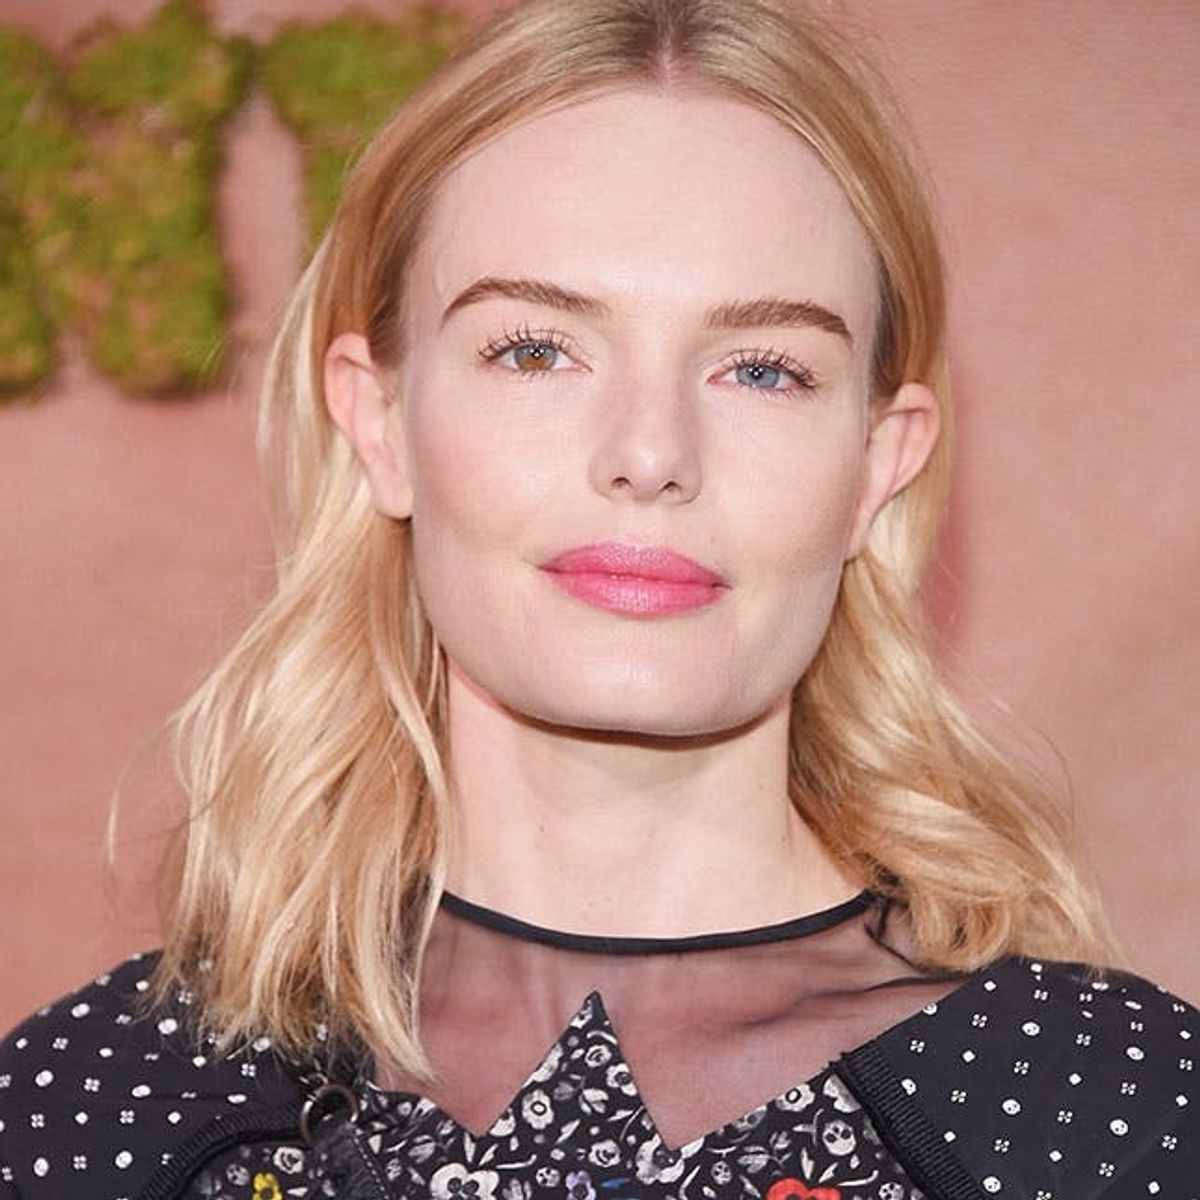 You’re 1 Simple T-Shirt Hack Away from Stealing Kate Bosworth’s Style